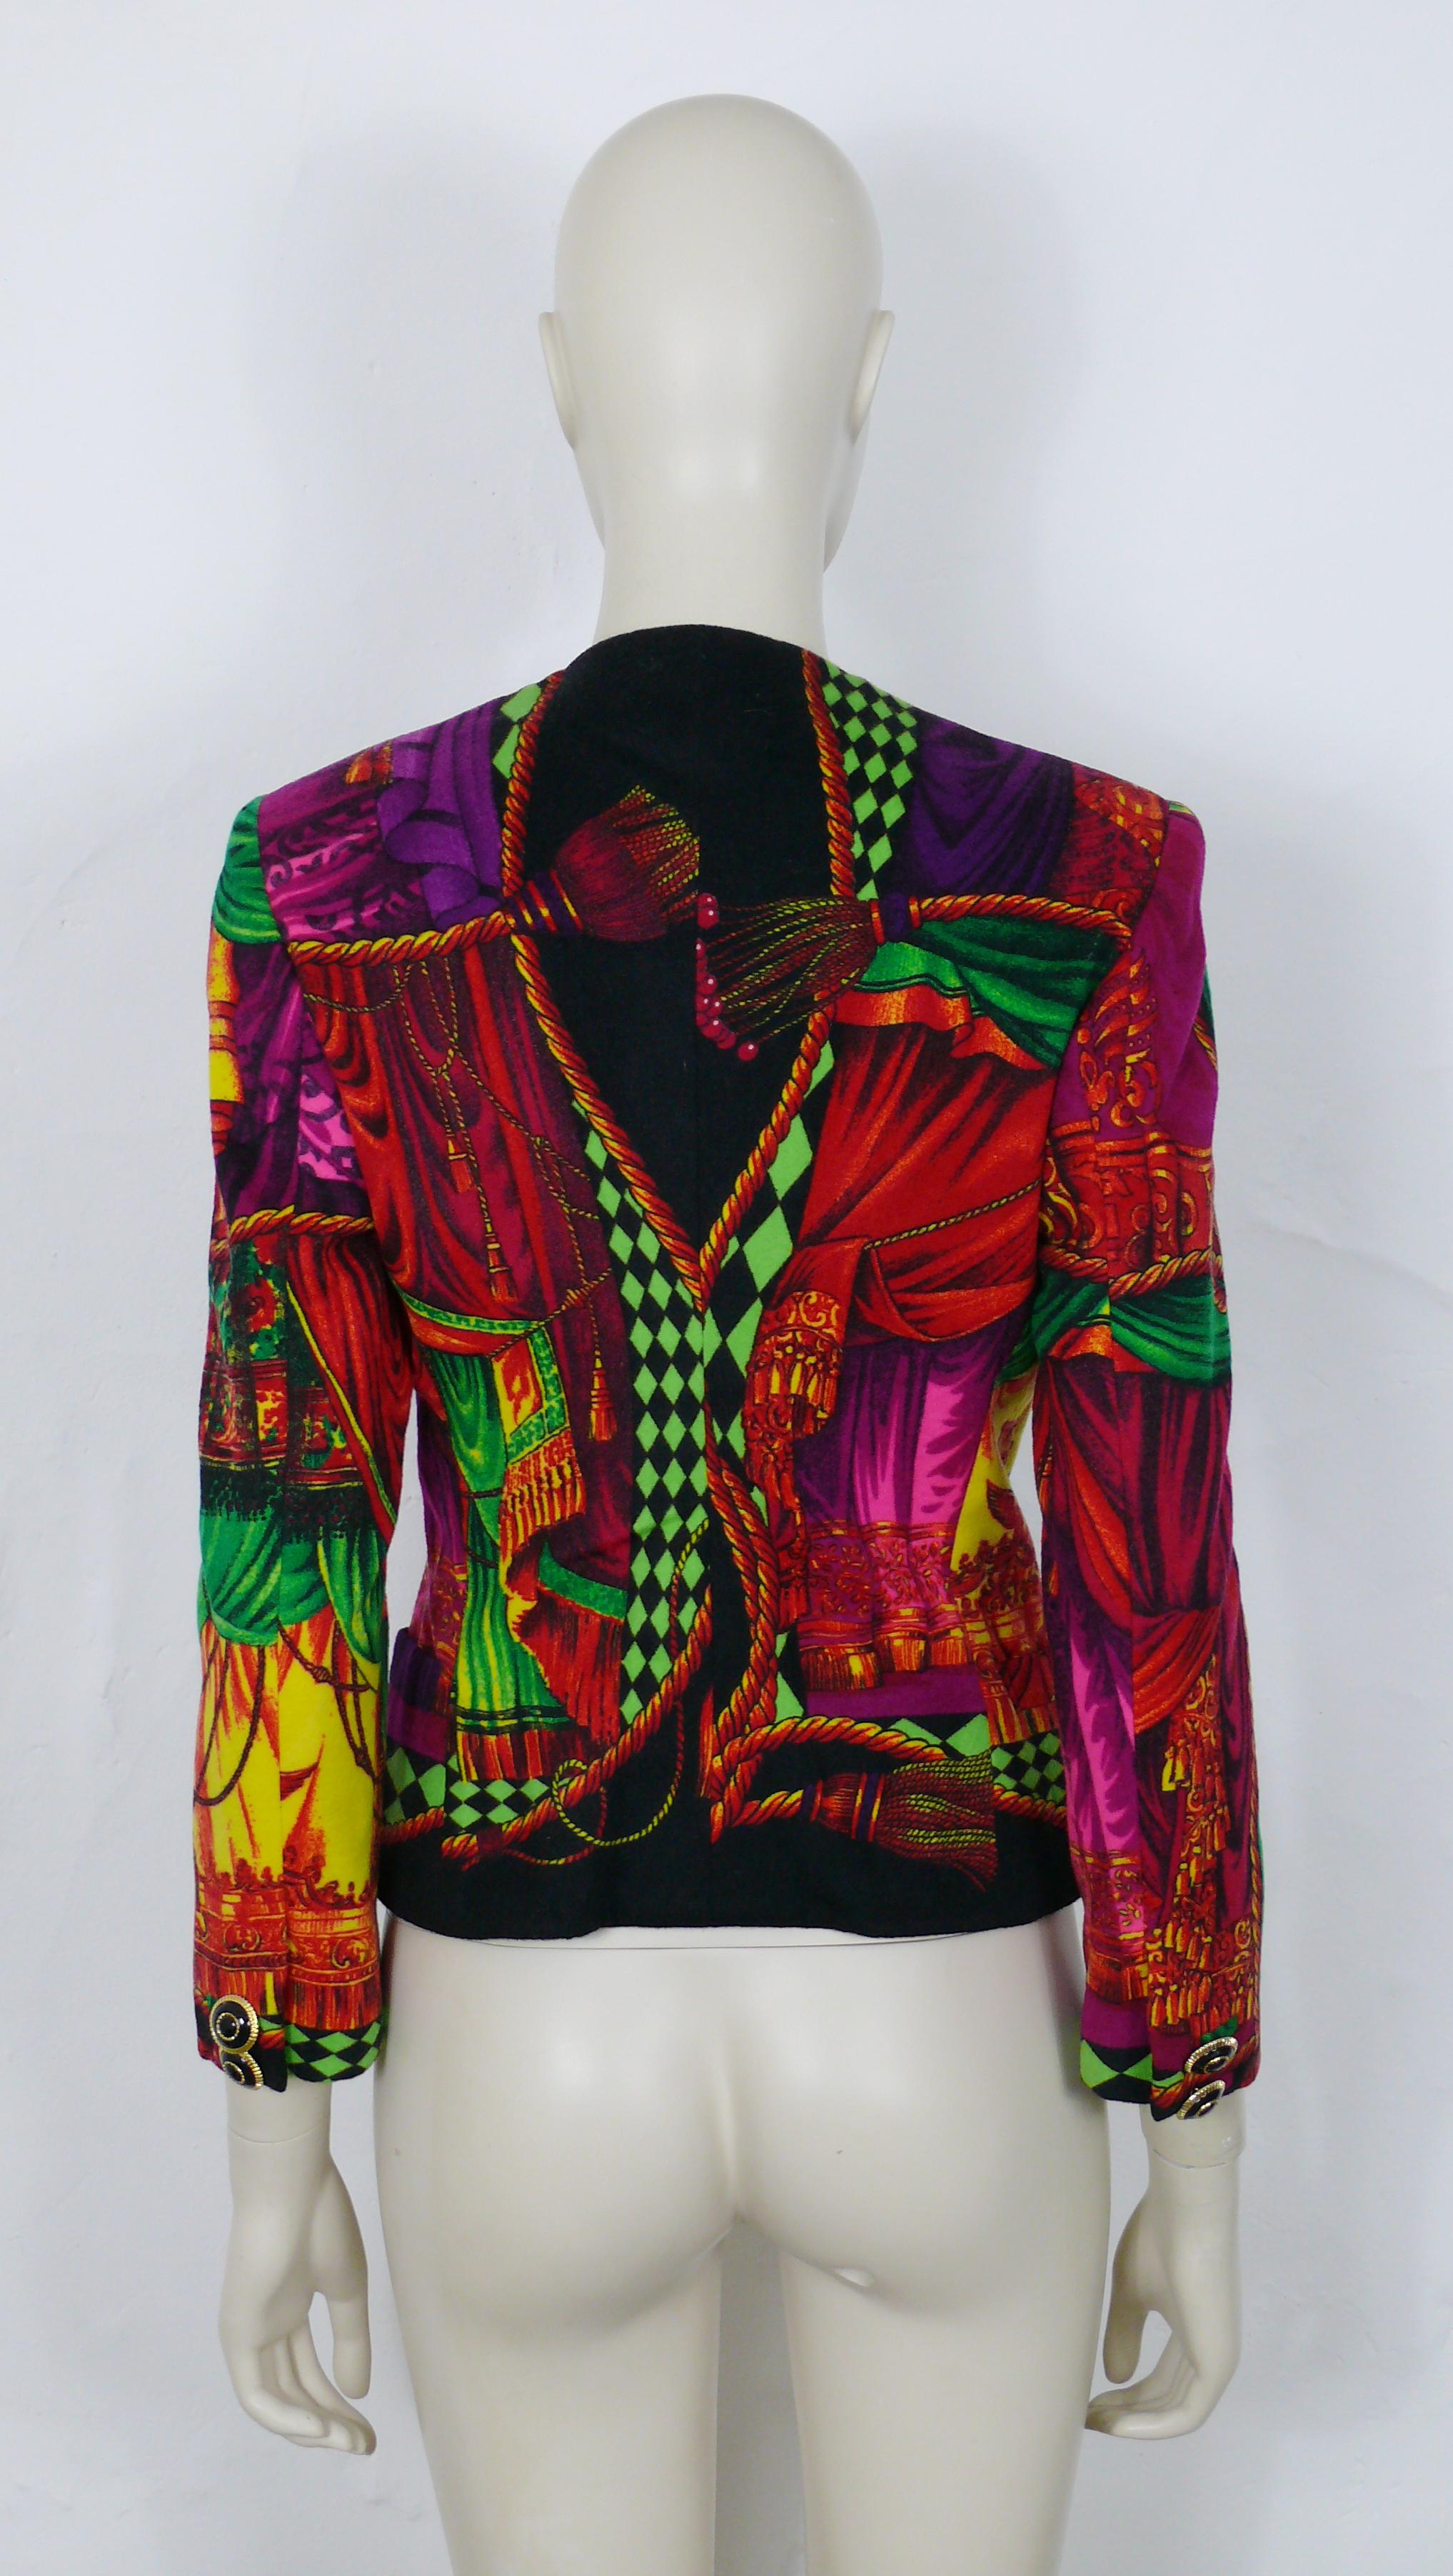 Gianni Versace Couture Iconic Fall/Winter 1991/92 Teather Drape Print Jacket In Excellent Condition For Sale In Nice, FR